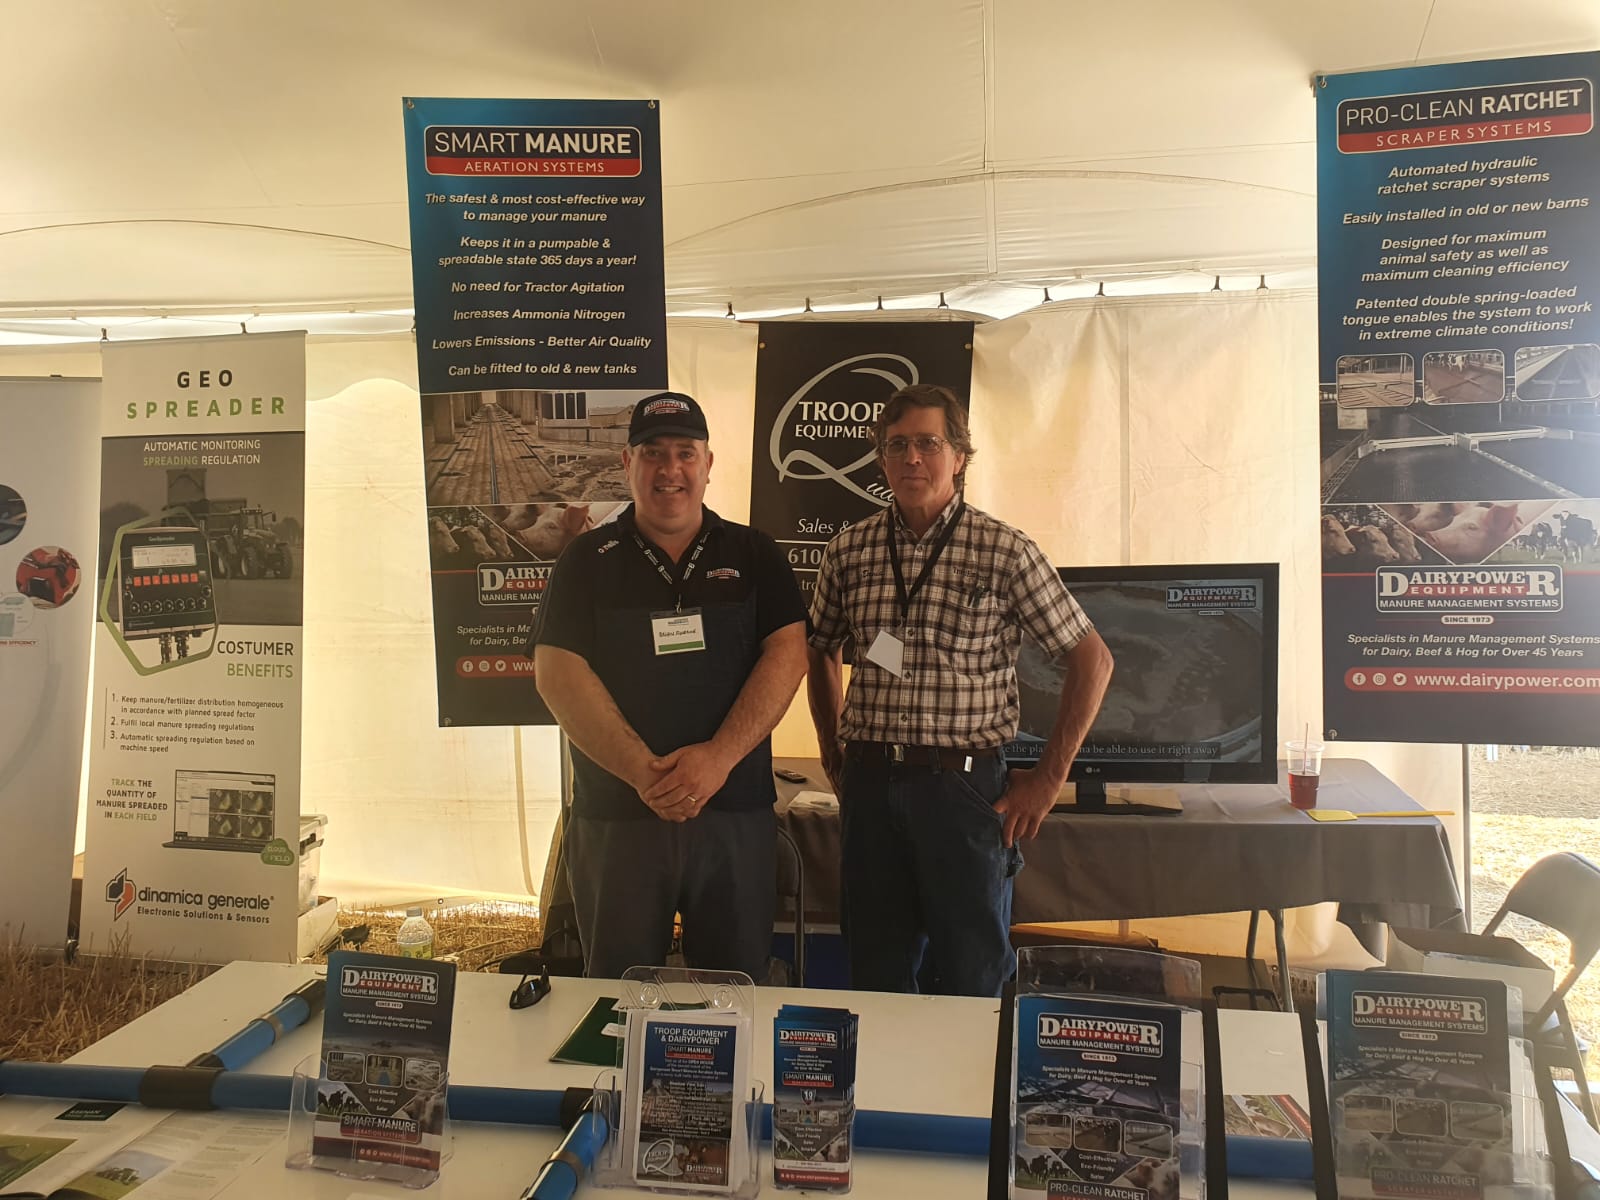 North American Manure Expo with Troop Equipment with two representatives behind the display